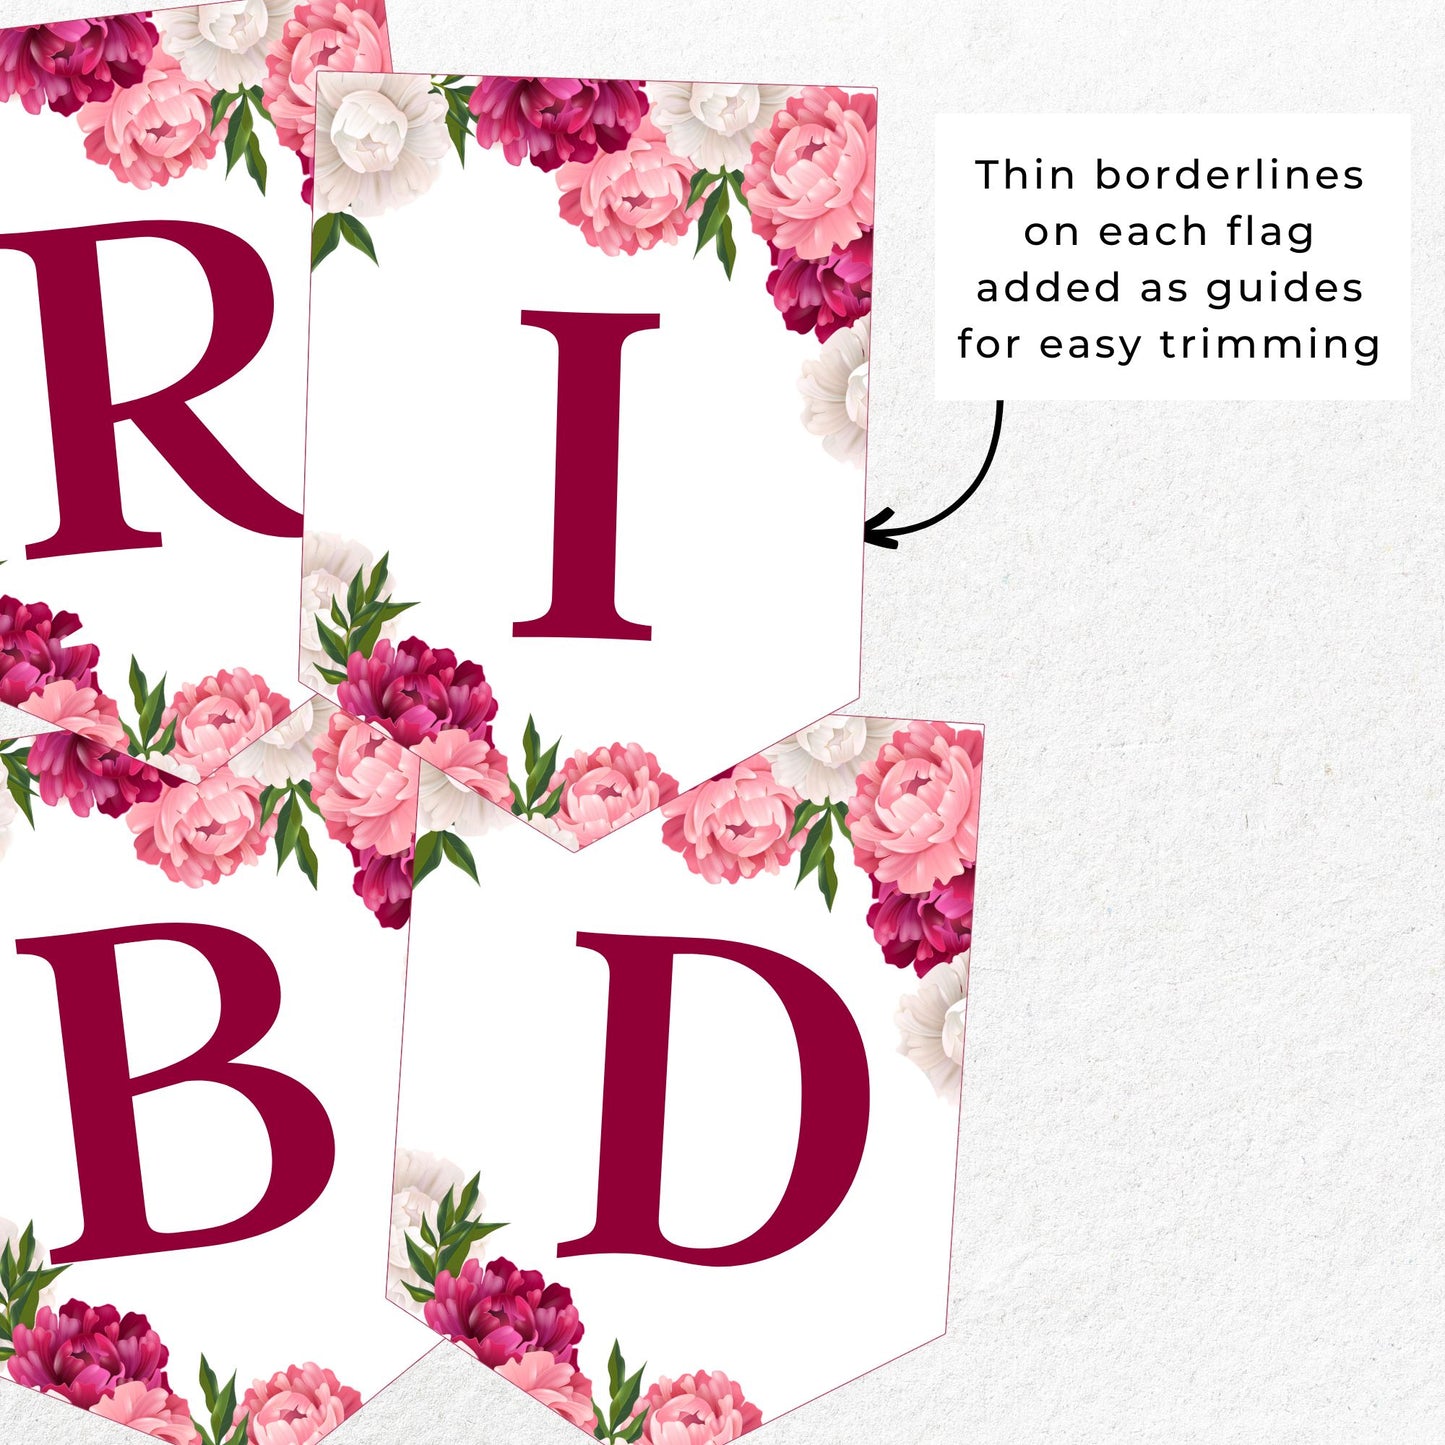 Bride To Be Printable Banner